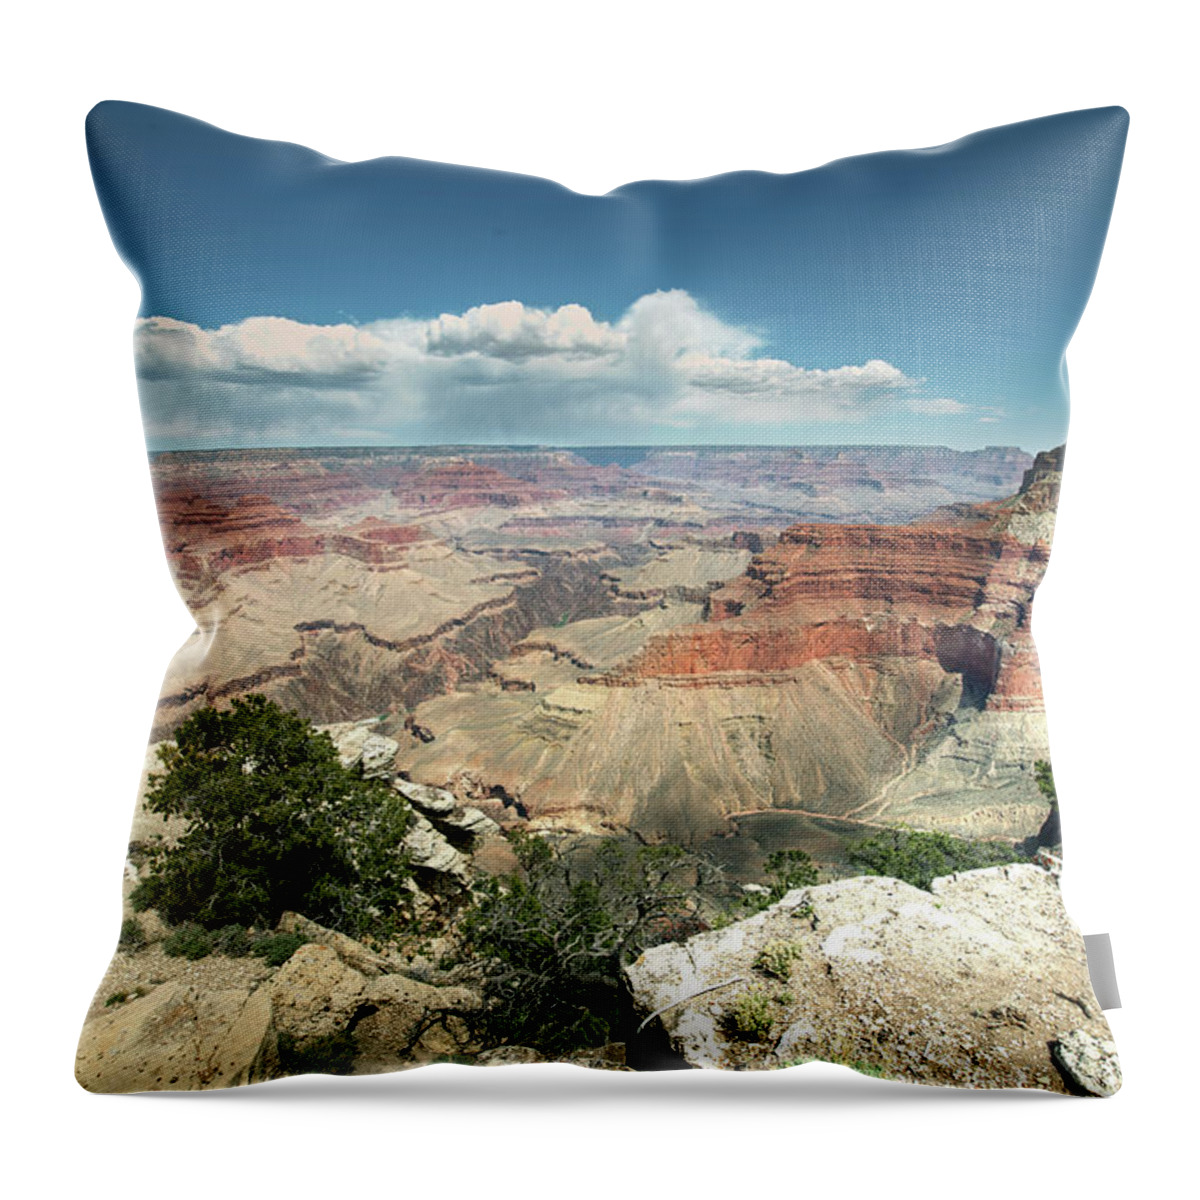 Tranquility Throw Pillow featuring the photograph Storm On The Other Side - Grand Canyon by Gail Shotlander